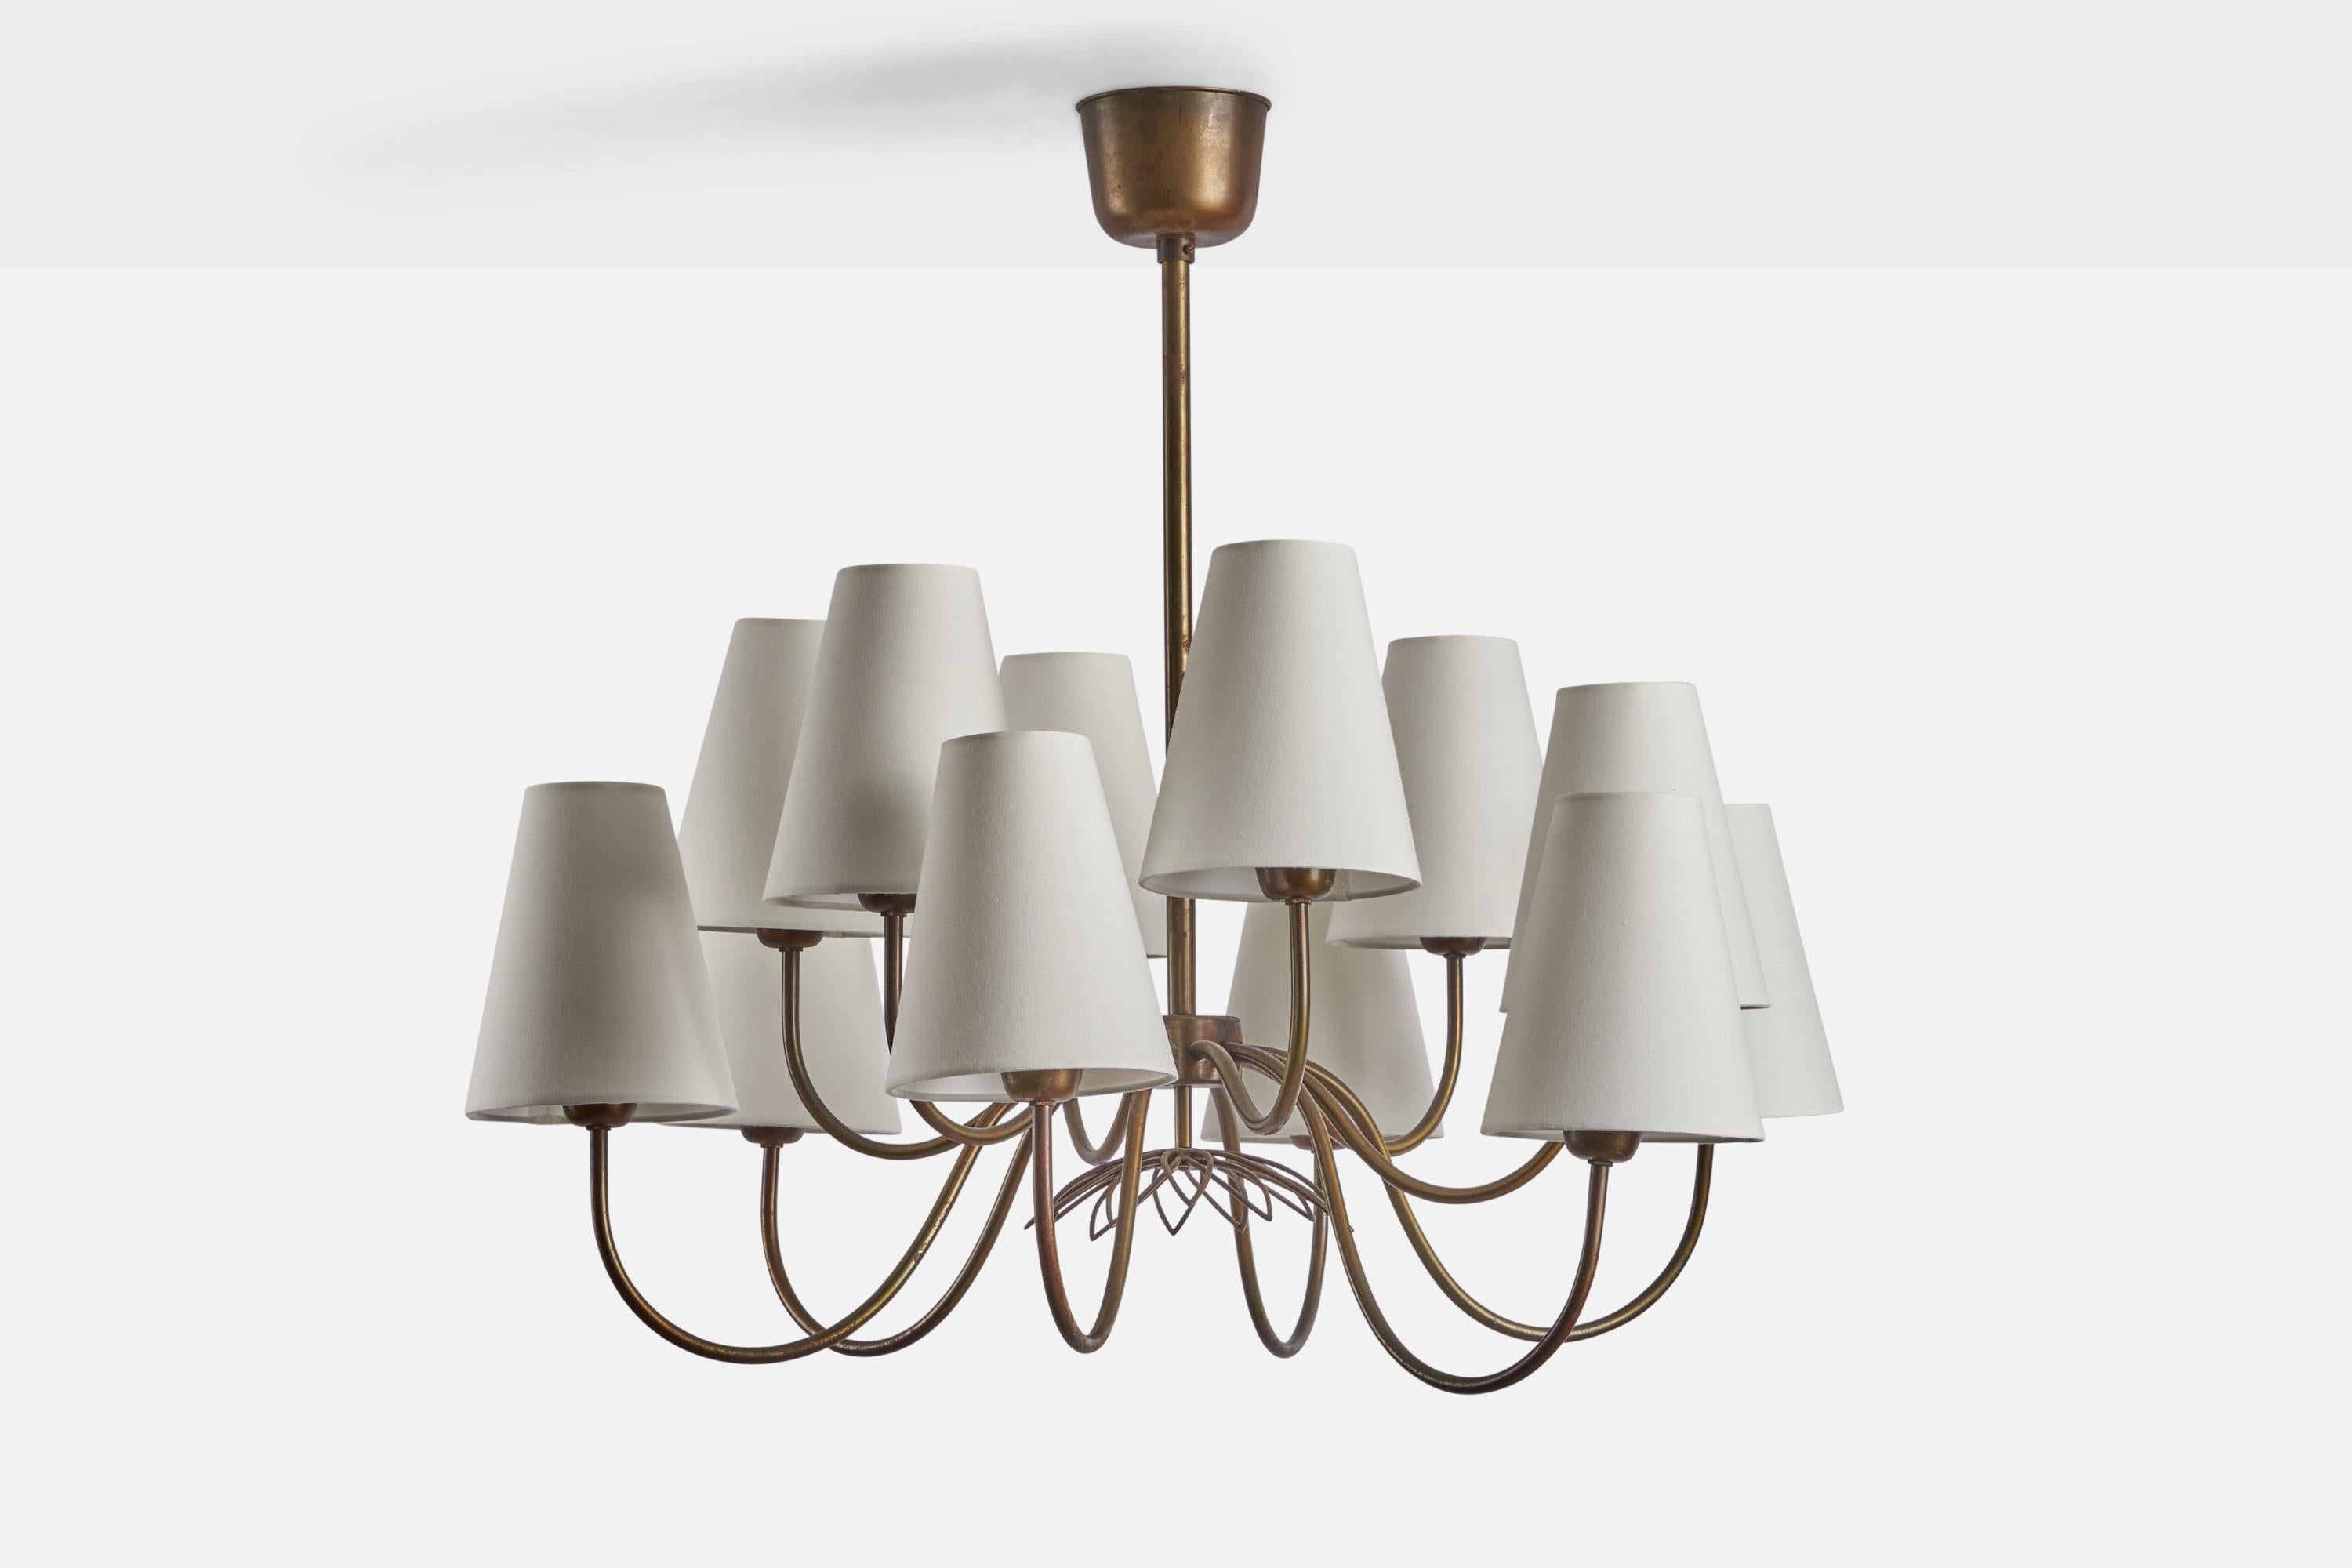 A twelve-armed brass and white fabric chandelier designed by Hans Bergström and produced by Atelje Lyktan, Åhus, Sweden, c. 1940s.

Overall Dimensions (inches): 24” H x 30” Diameter
Bulb Specifications: E-26 Bulb
Number of Sockets: 12